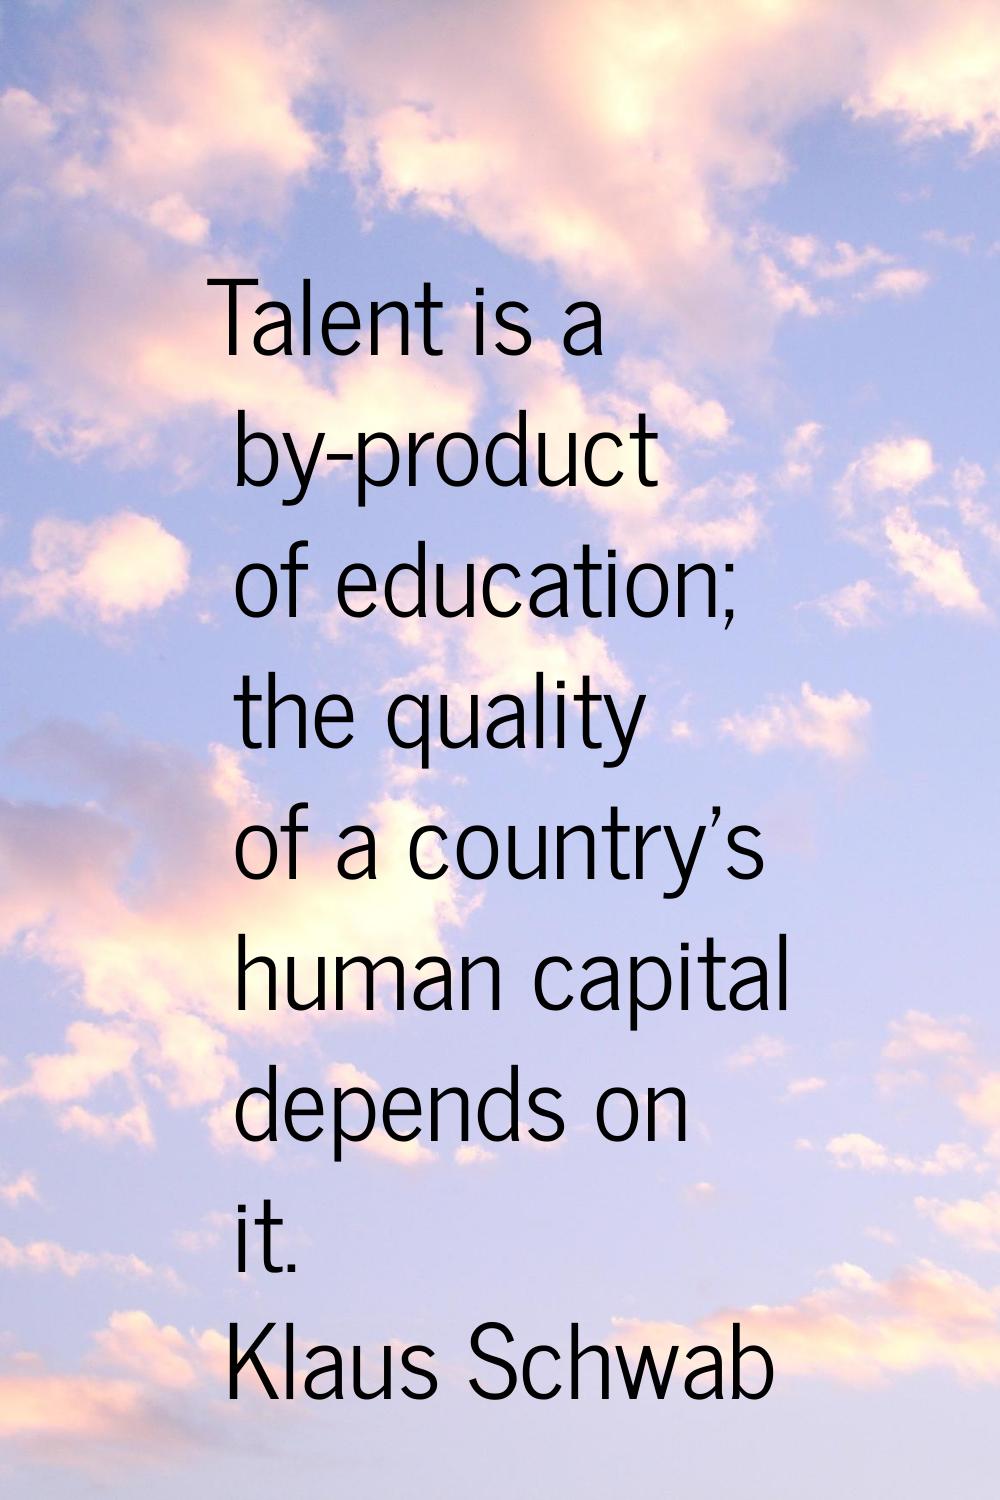 Talent is a by-product of education; the quality of a country's human capital depends on it.